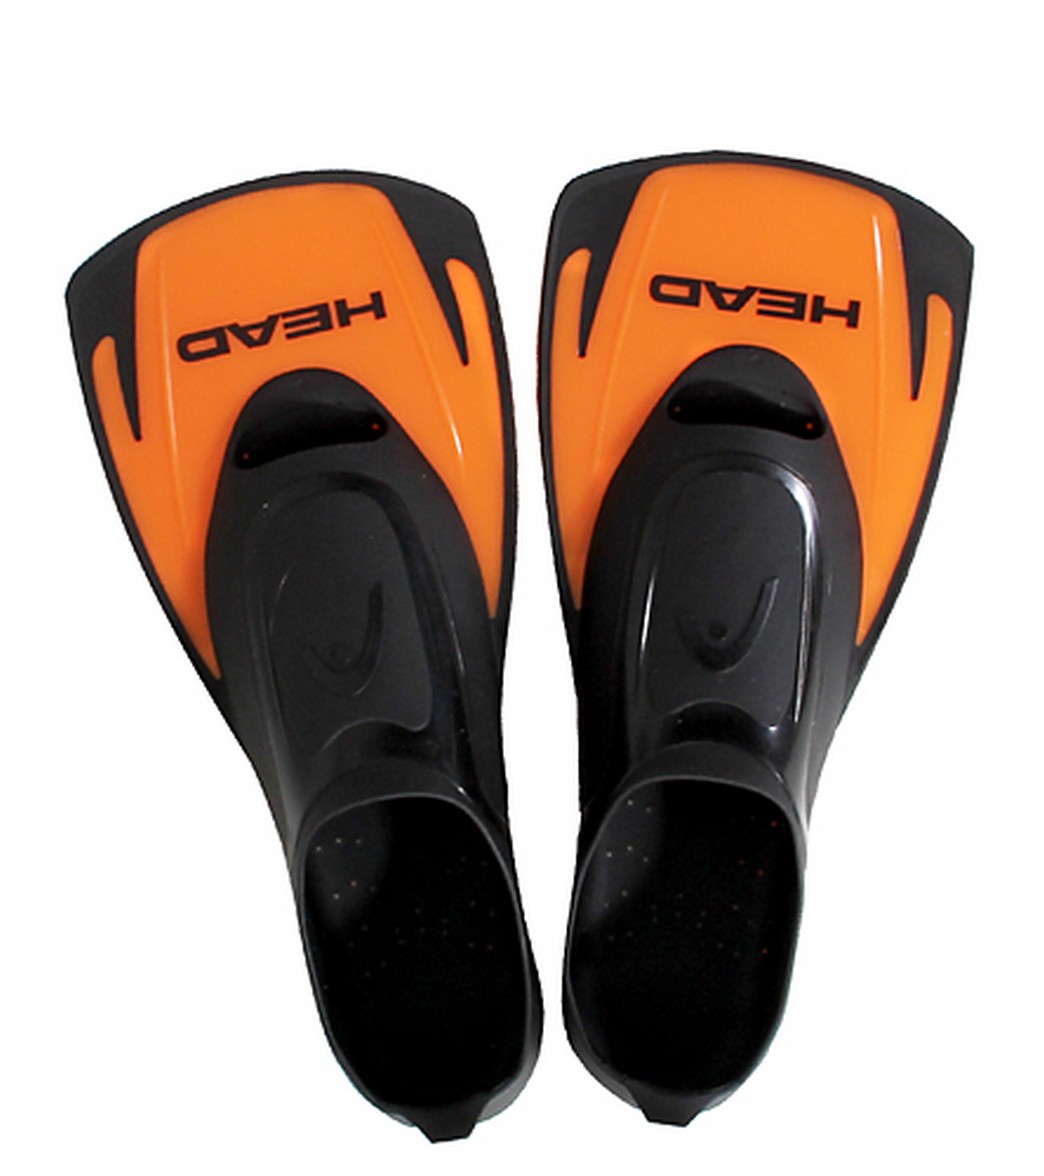 swimming fin shoes